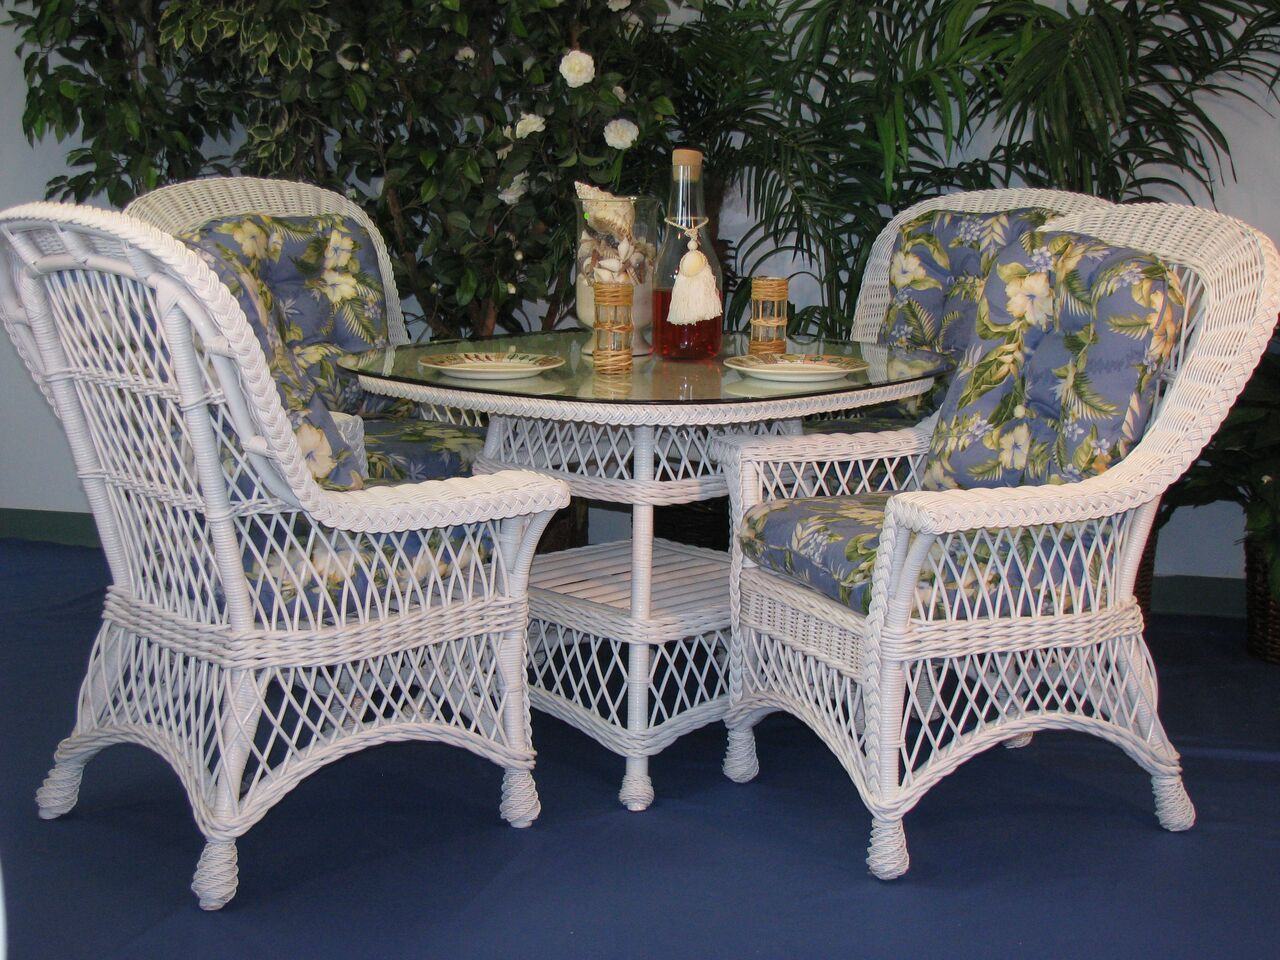 Spice Islands Spice Islands Bar Harbor 5 Piece Dining Set In White With 42" Glass By Spice Islands Wicker Dining Set - Rattan Imports